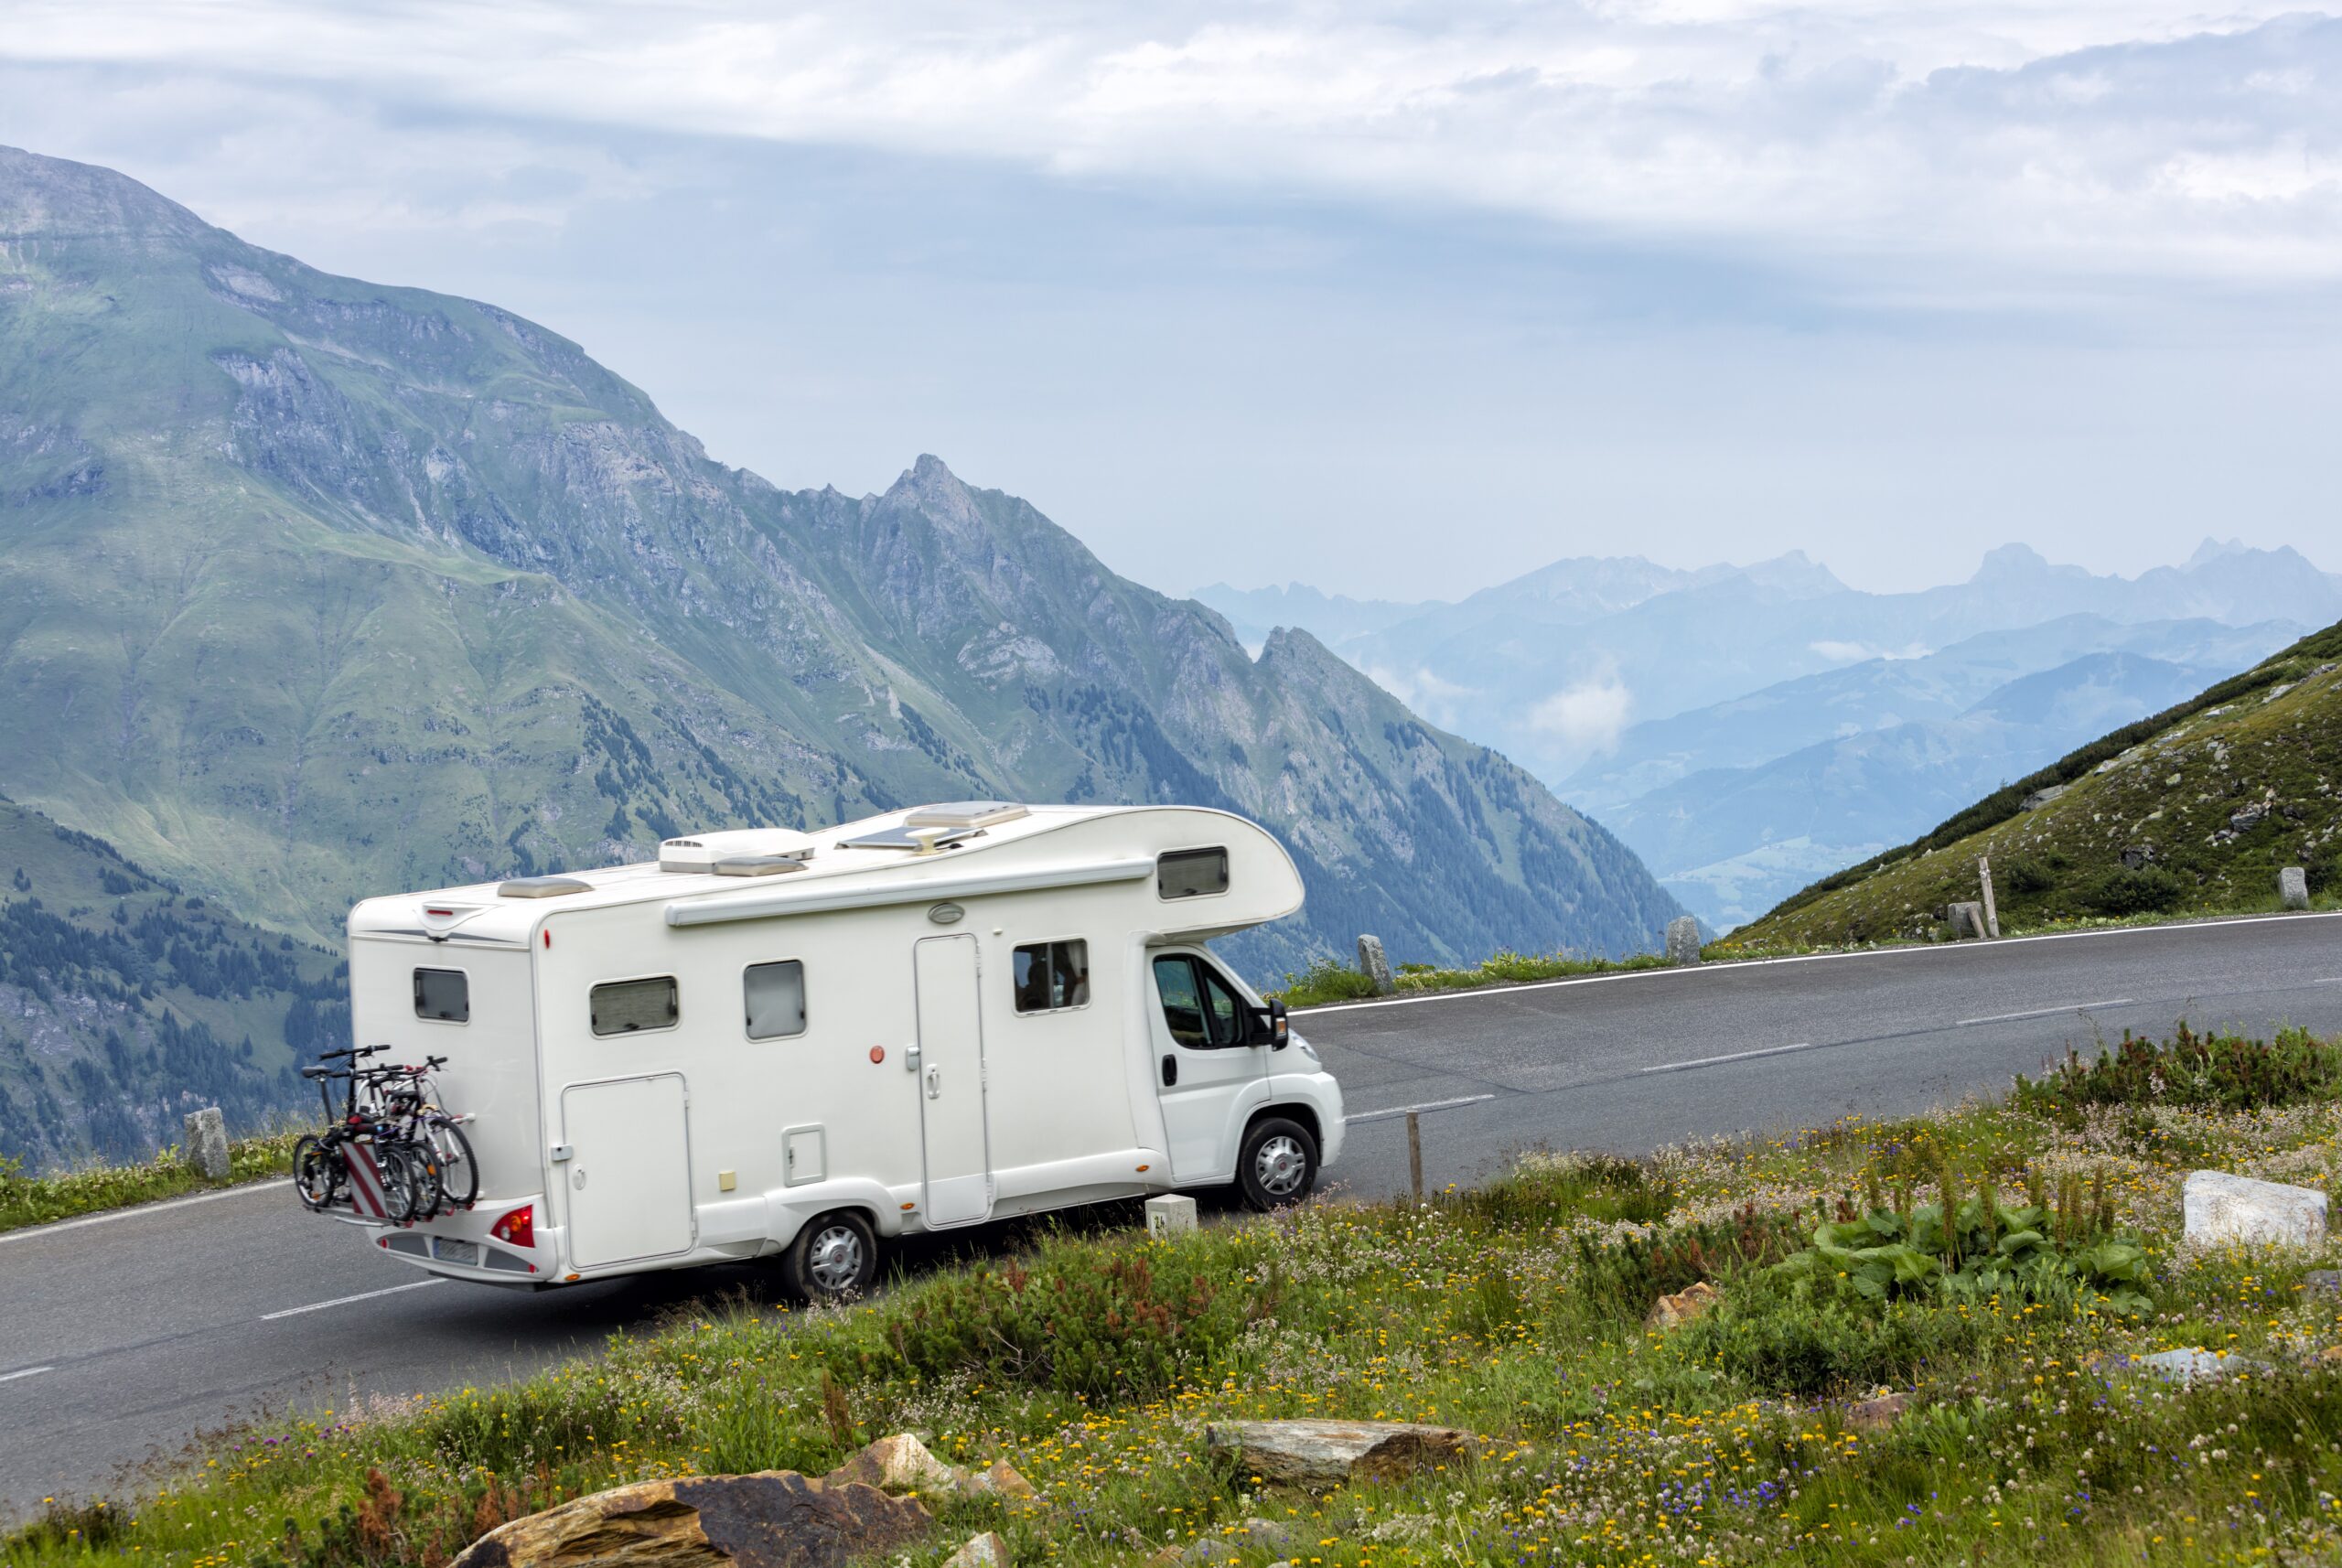 Here are the changes that Europe will implement for the type B motorhome license